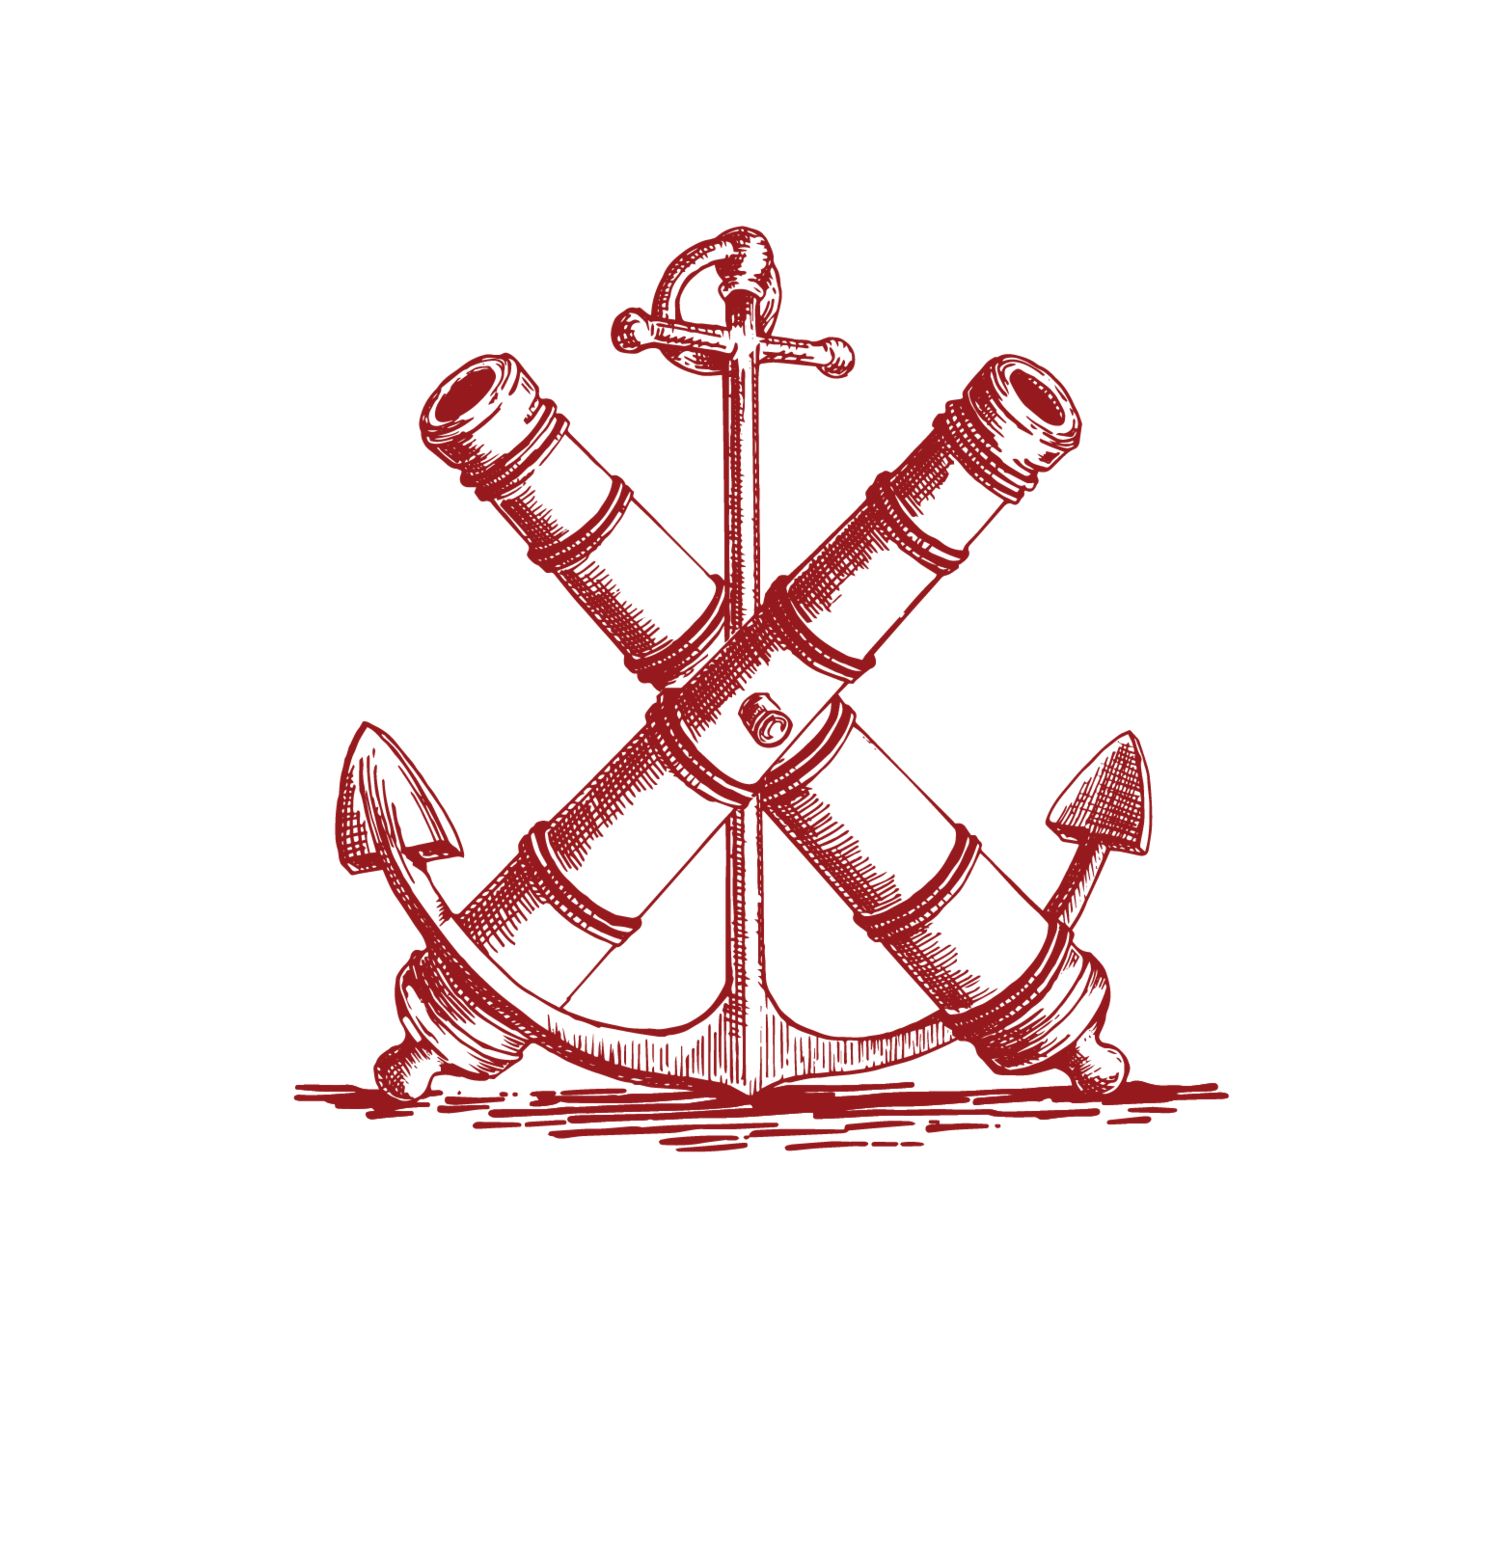 Marblehead Brewing Co.